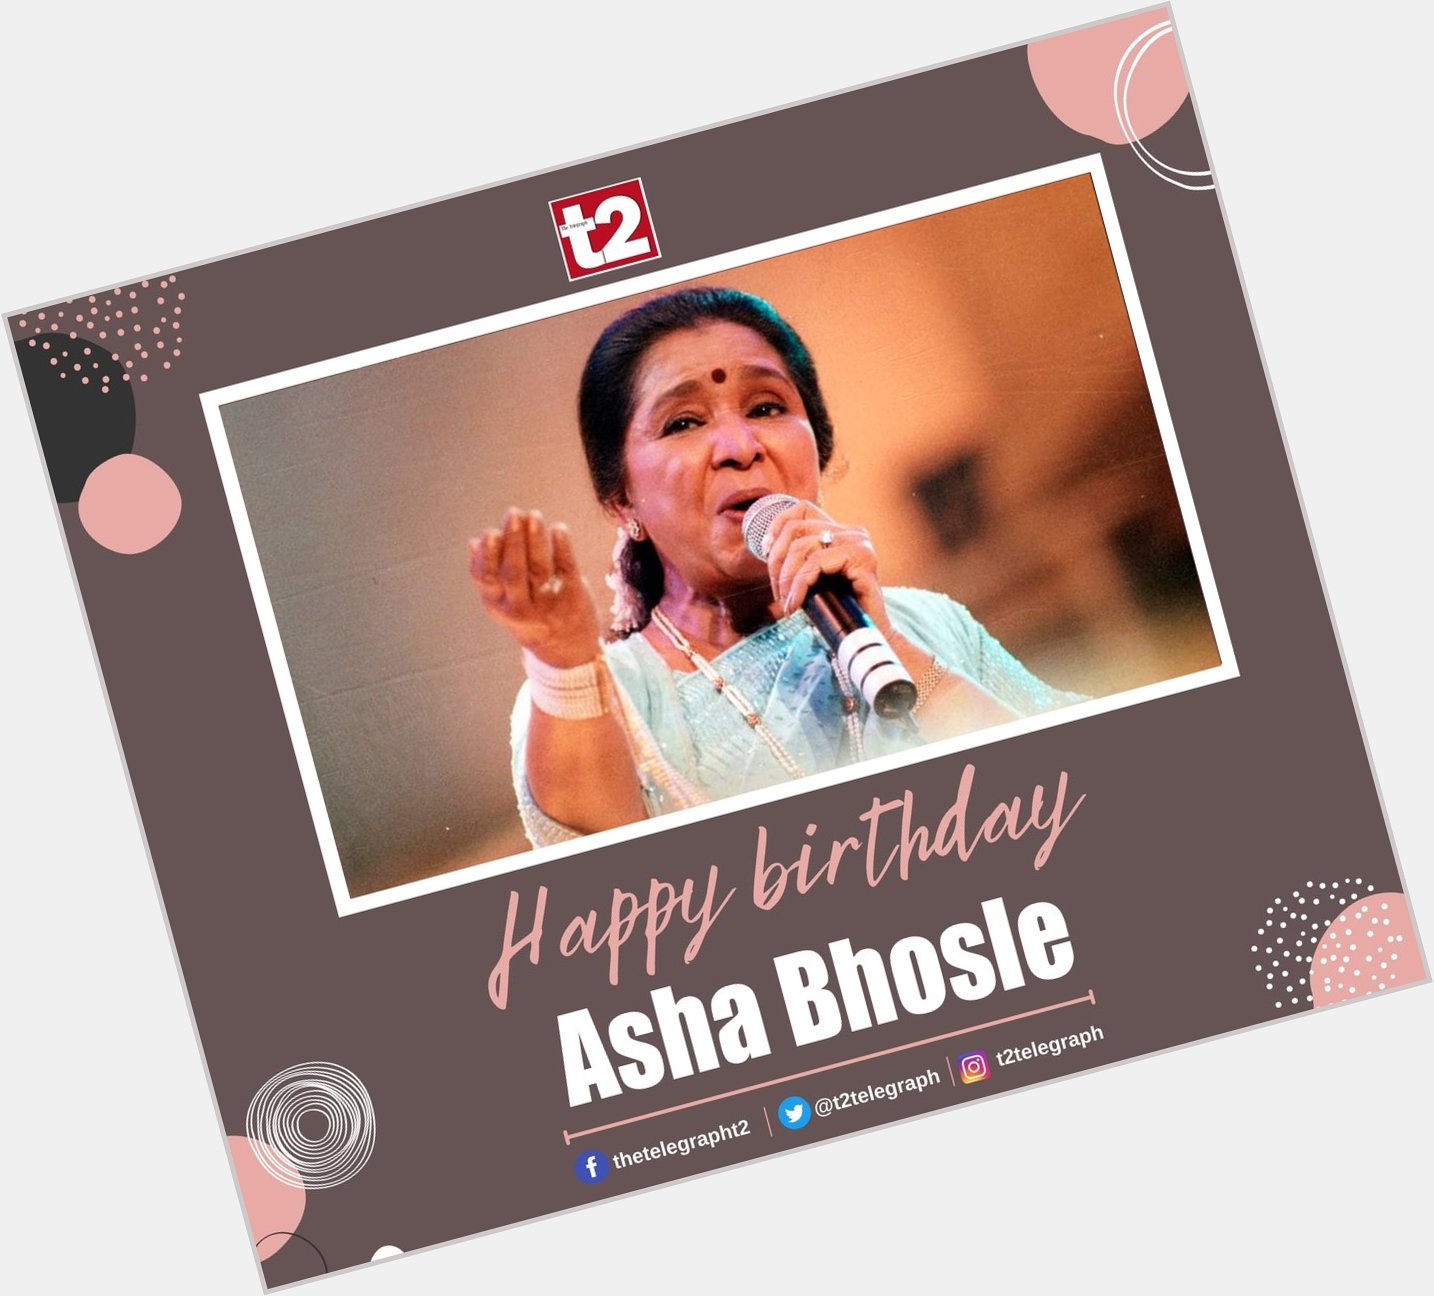 T2 wishes the melody queen with the golden voice, Asha Bhosle, a very happy birthday. 